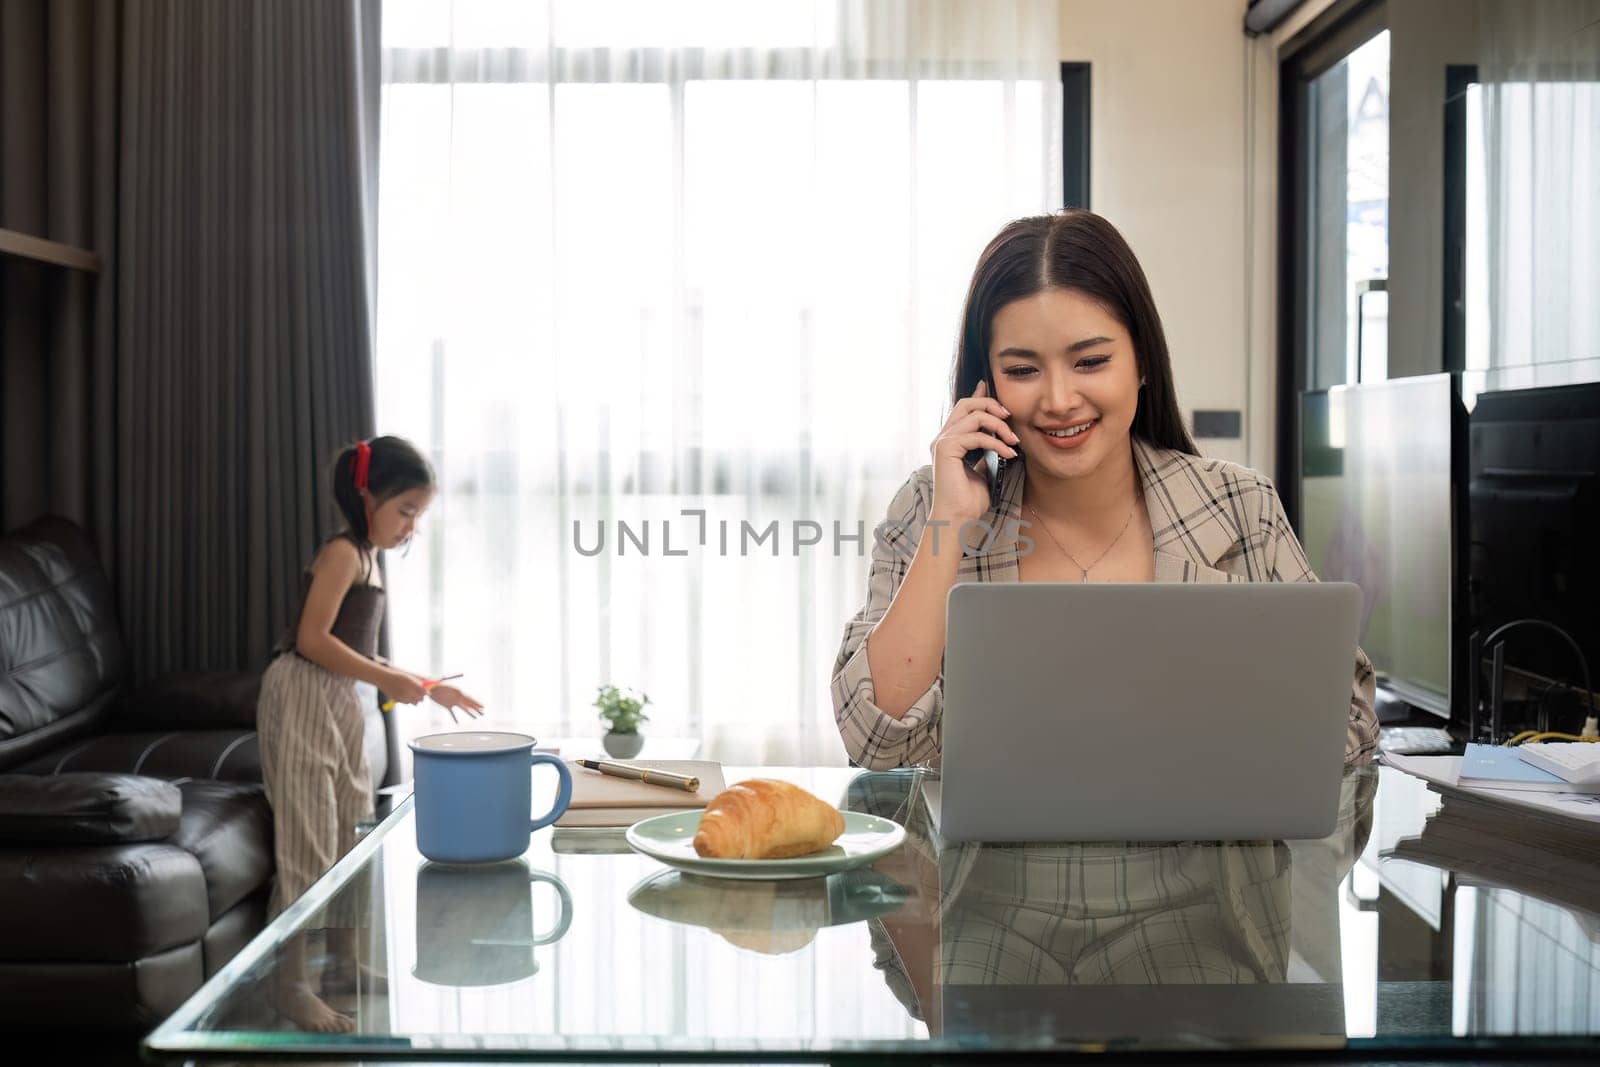 The young woman works from home, raises her daughter, and discusses work with co-workers on the phone and online. by wichayada